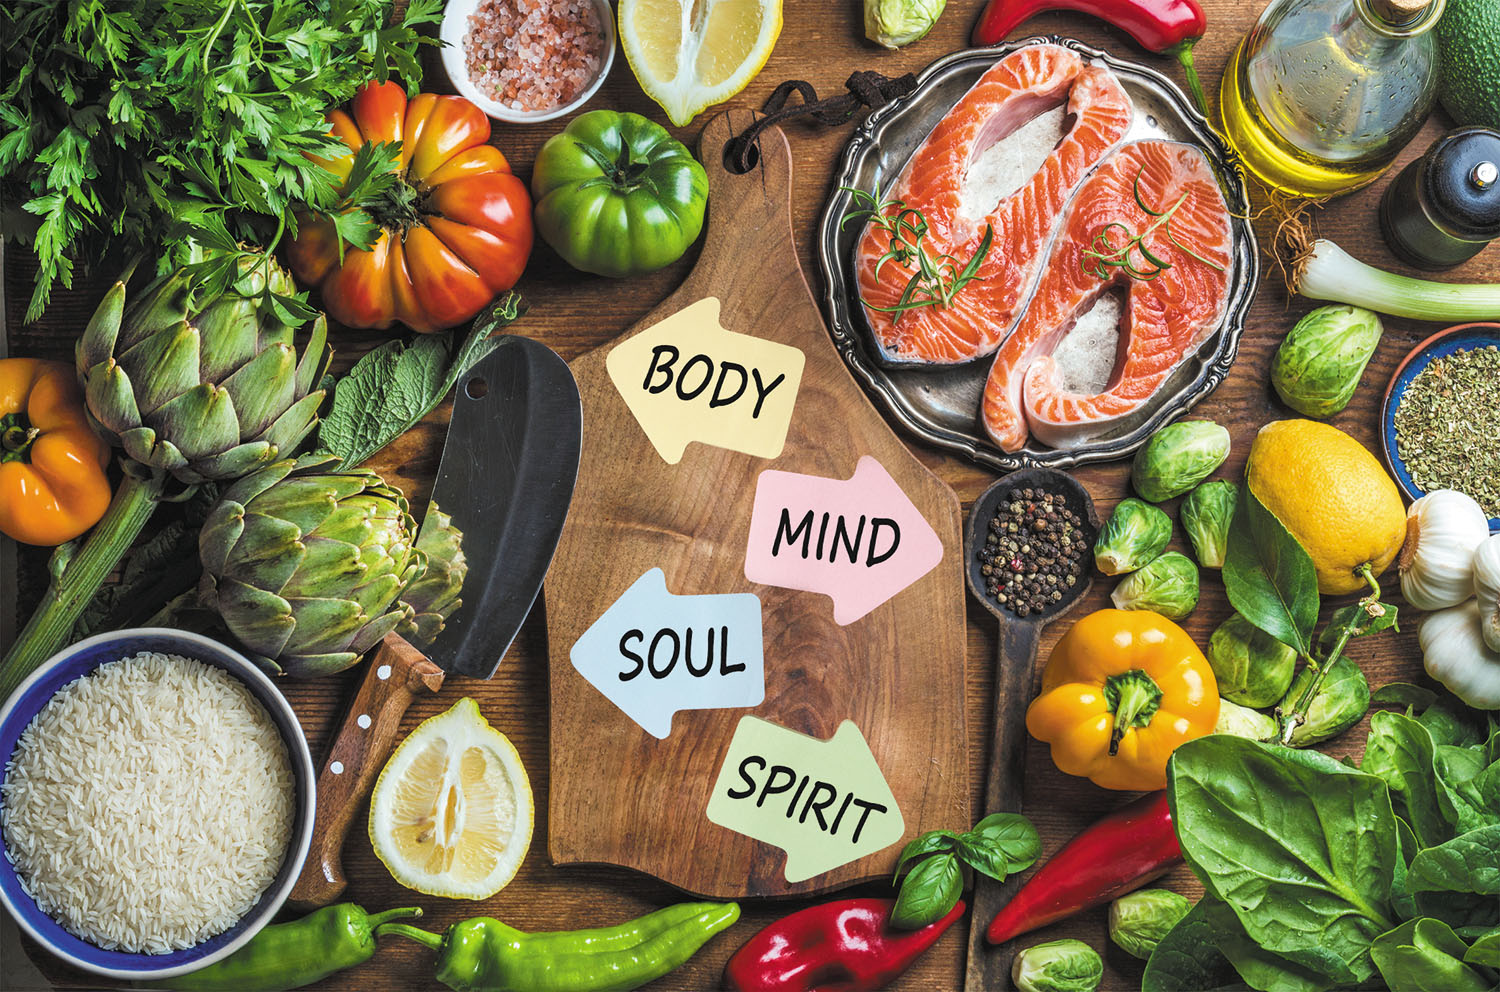 Food and mood: Is there a connection? - Harvard Health